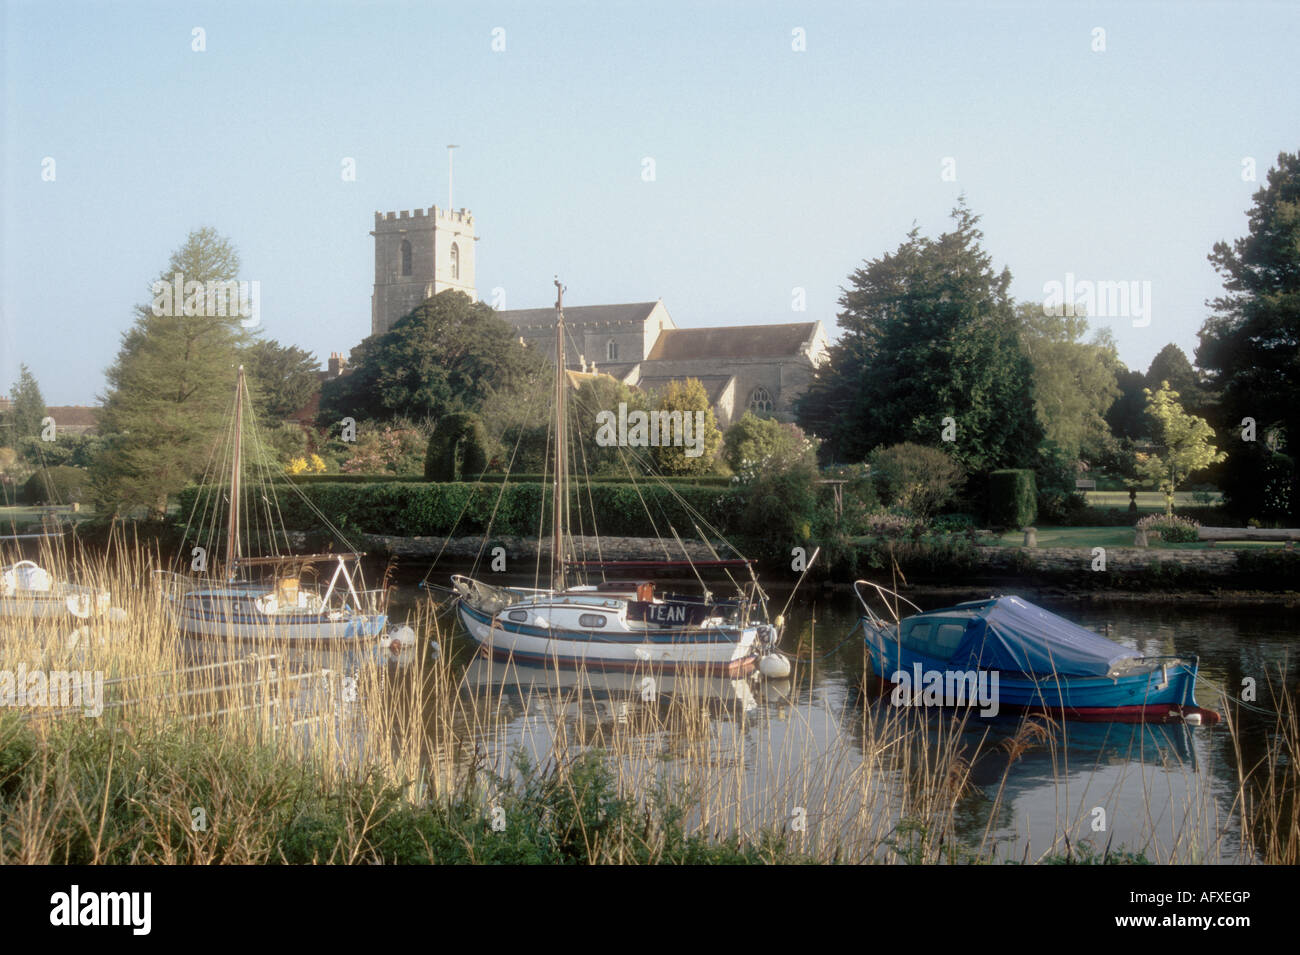 Boats moored on the River Frome at the Wareham Channel in Dorset, England, UK Stock Photo